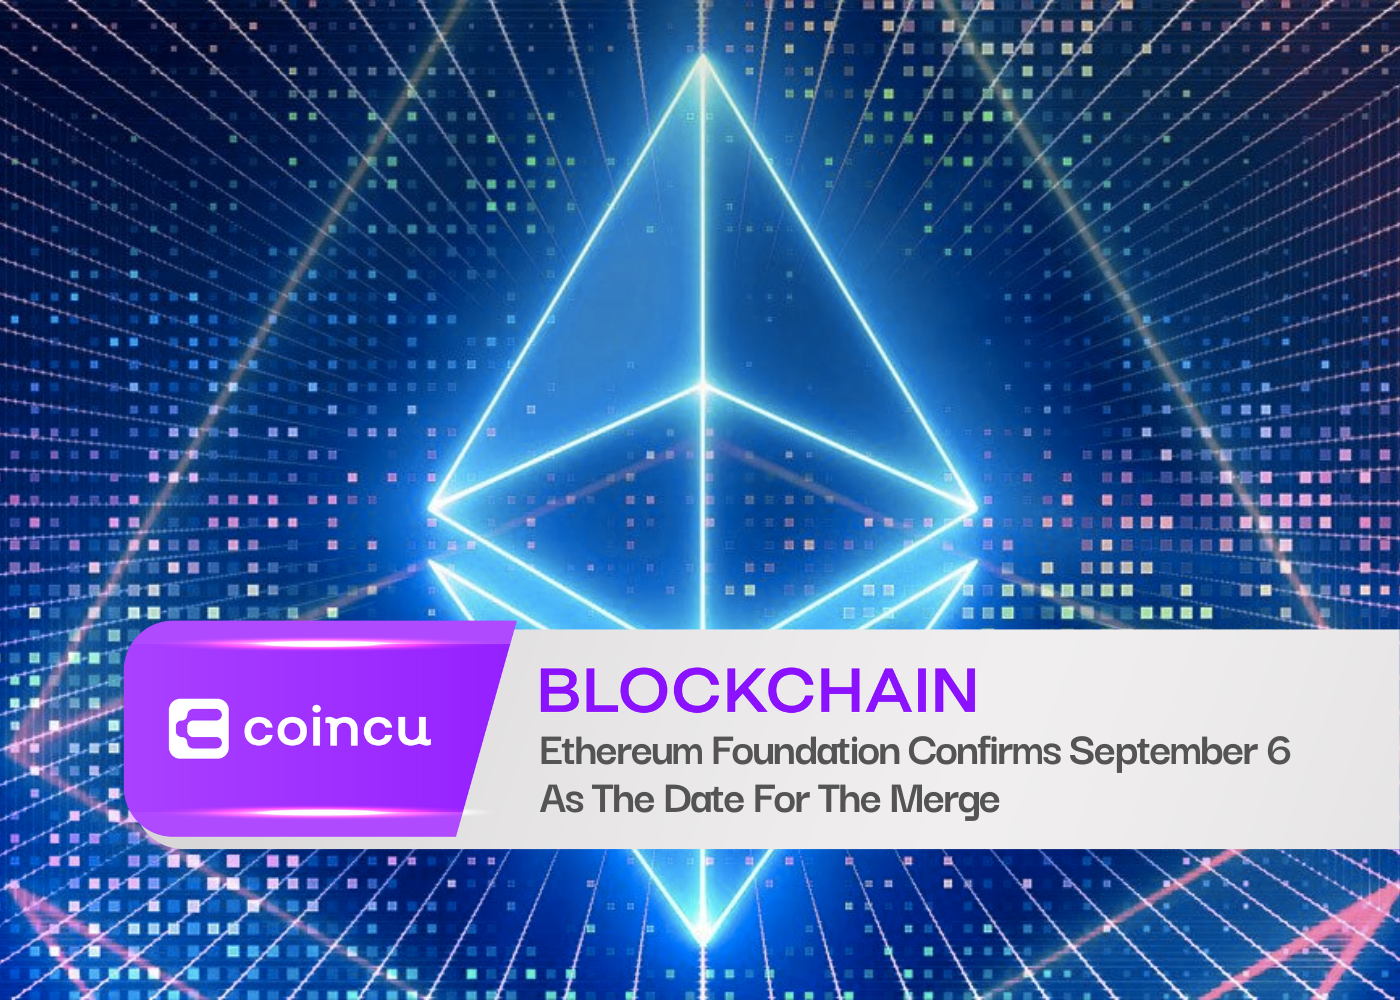 Ethereum Foundation Confirms September 6 As The Date For The Merge